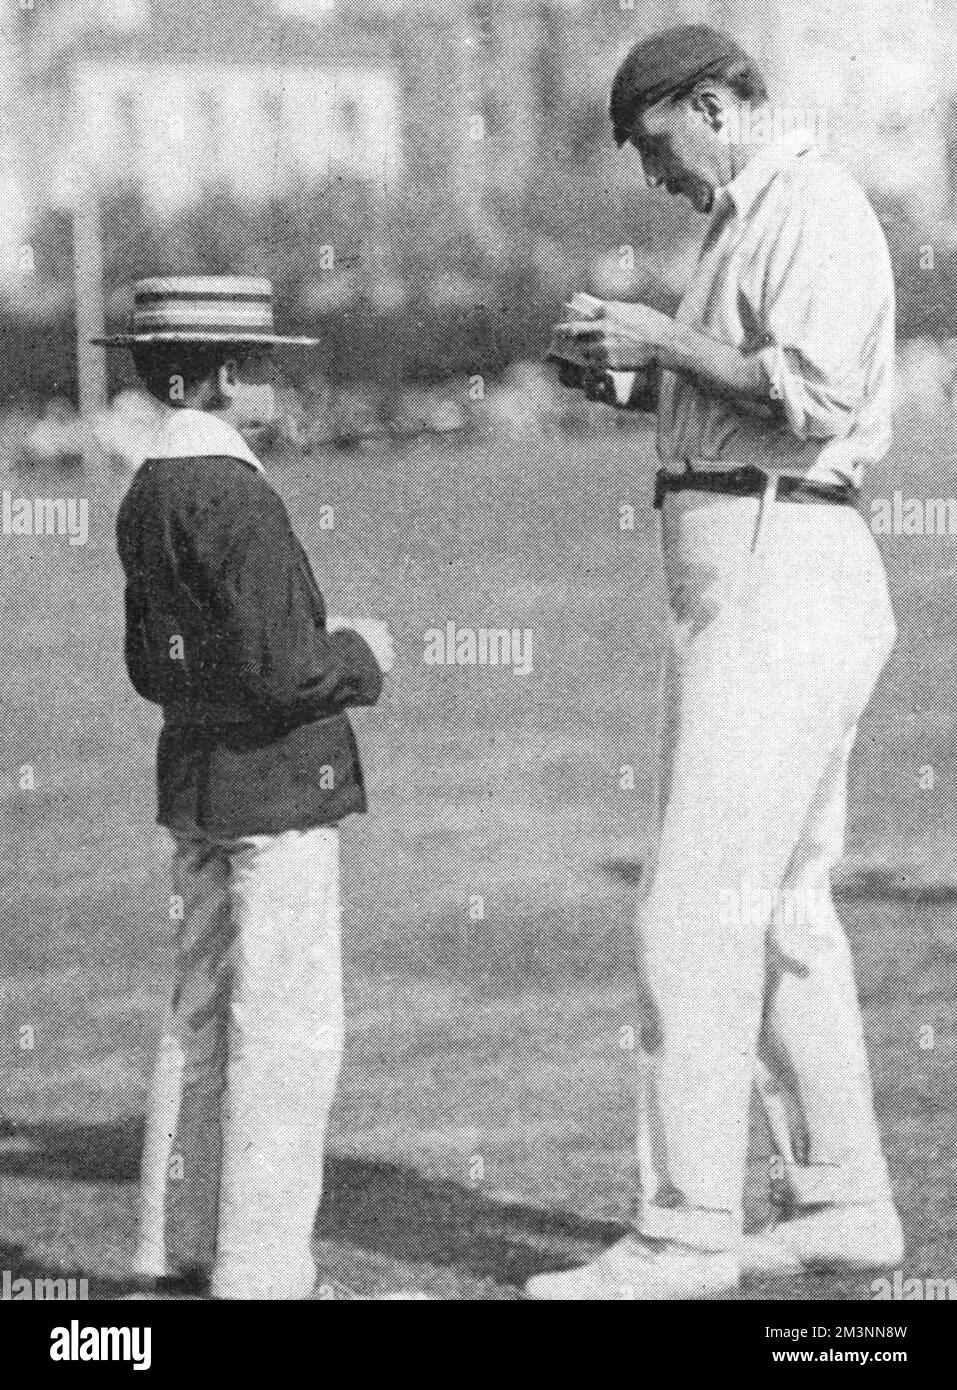 Lord Hawke, captain of the Yorkshire cricket team, signs an autograph for a young admirer during the match between county champions Yorkshire and an England XI which was played at Hastings between the 5th and 7th September, 1901      Date: September 1901 Stock Photo